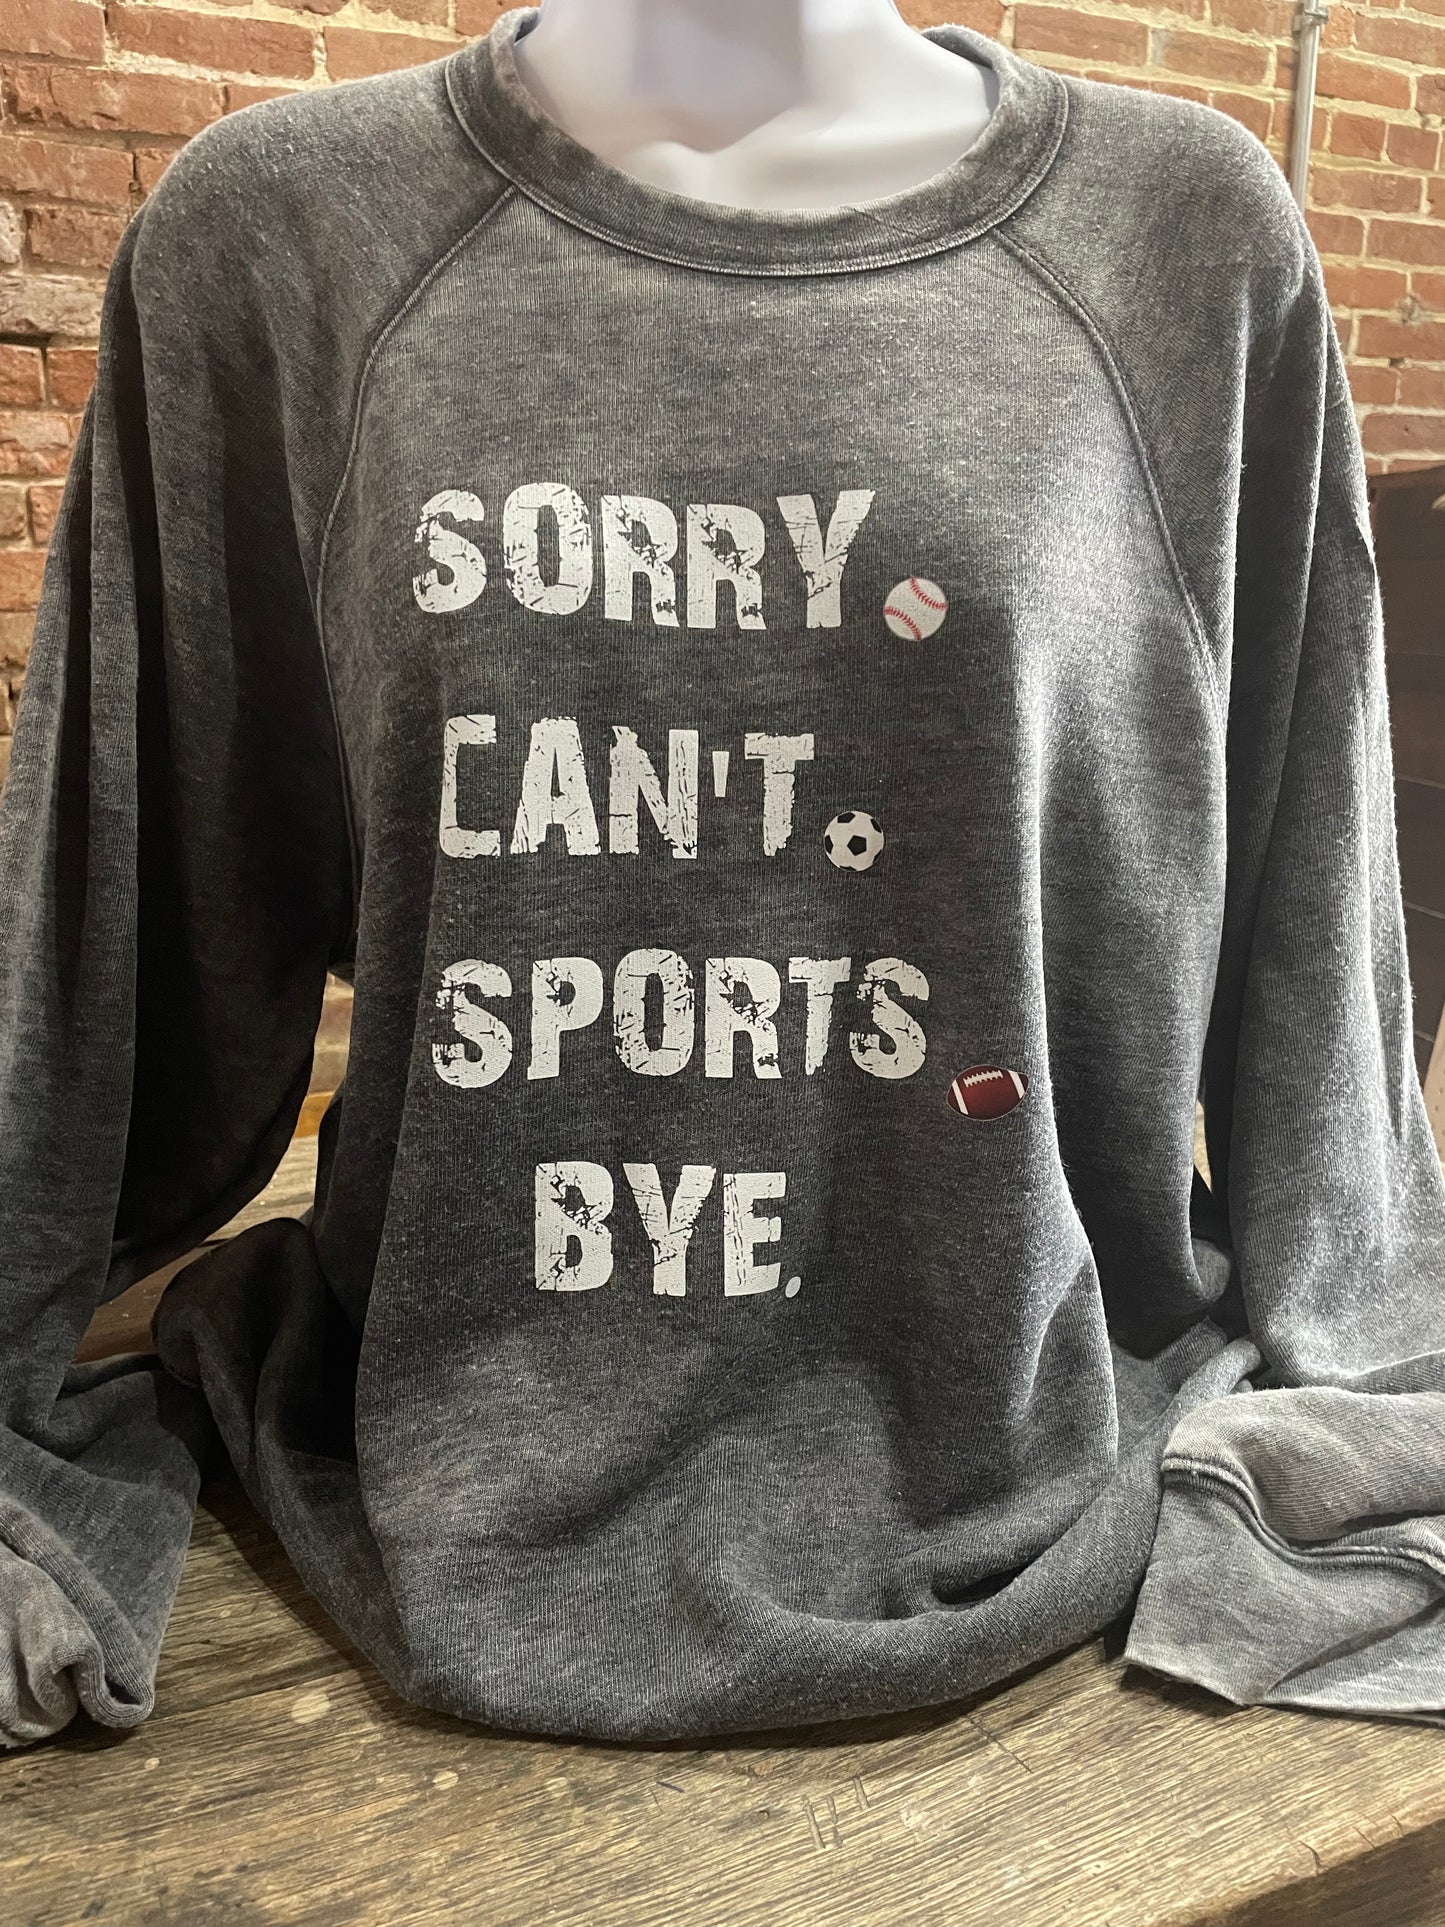 Sorry. Can’t. Sports. Bye. Shirt